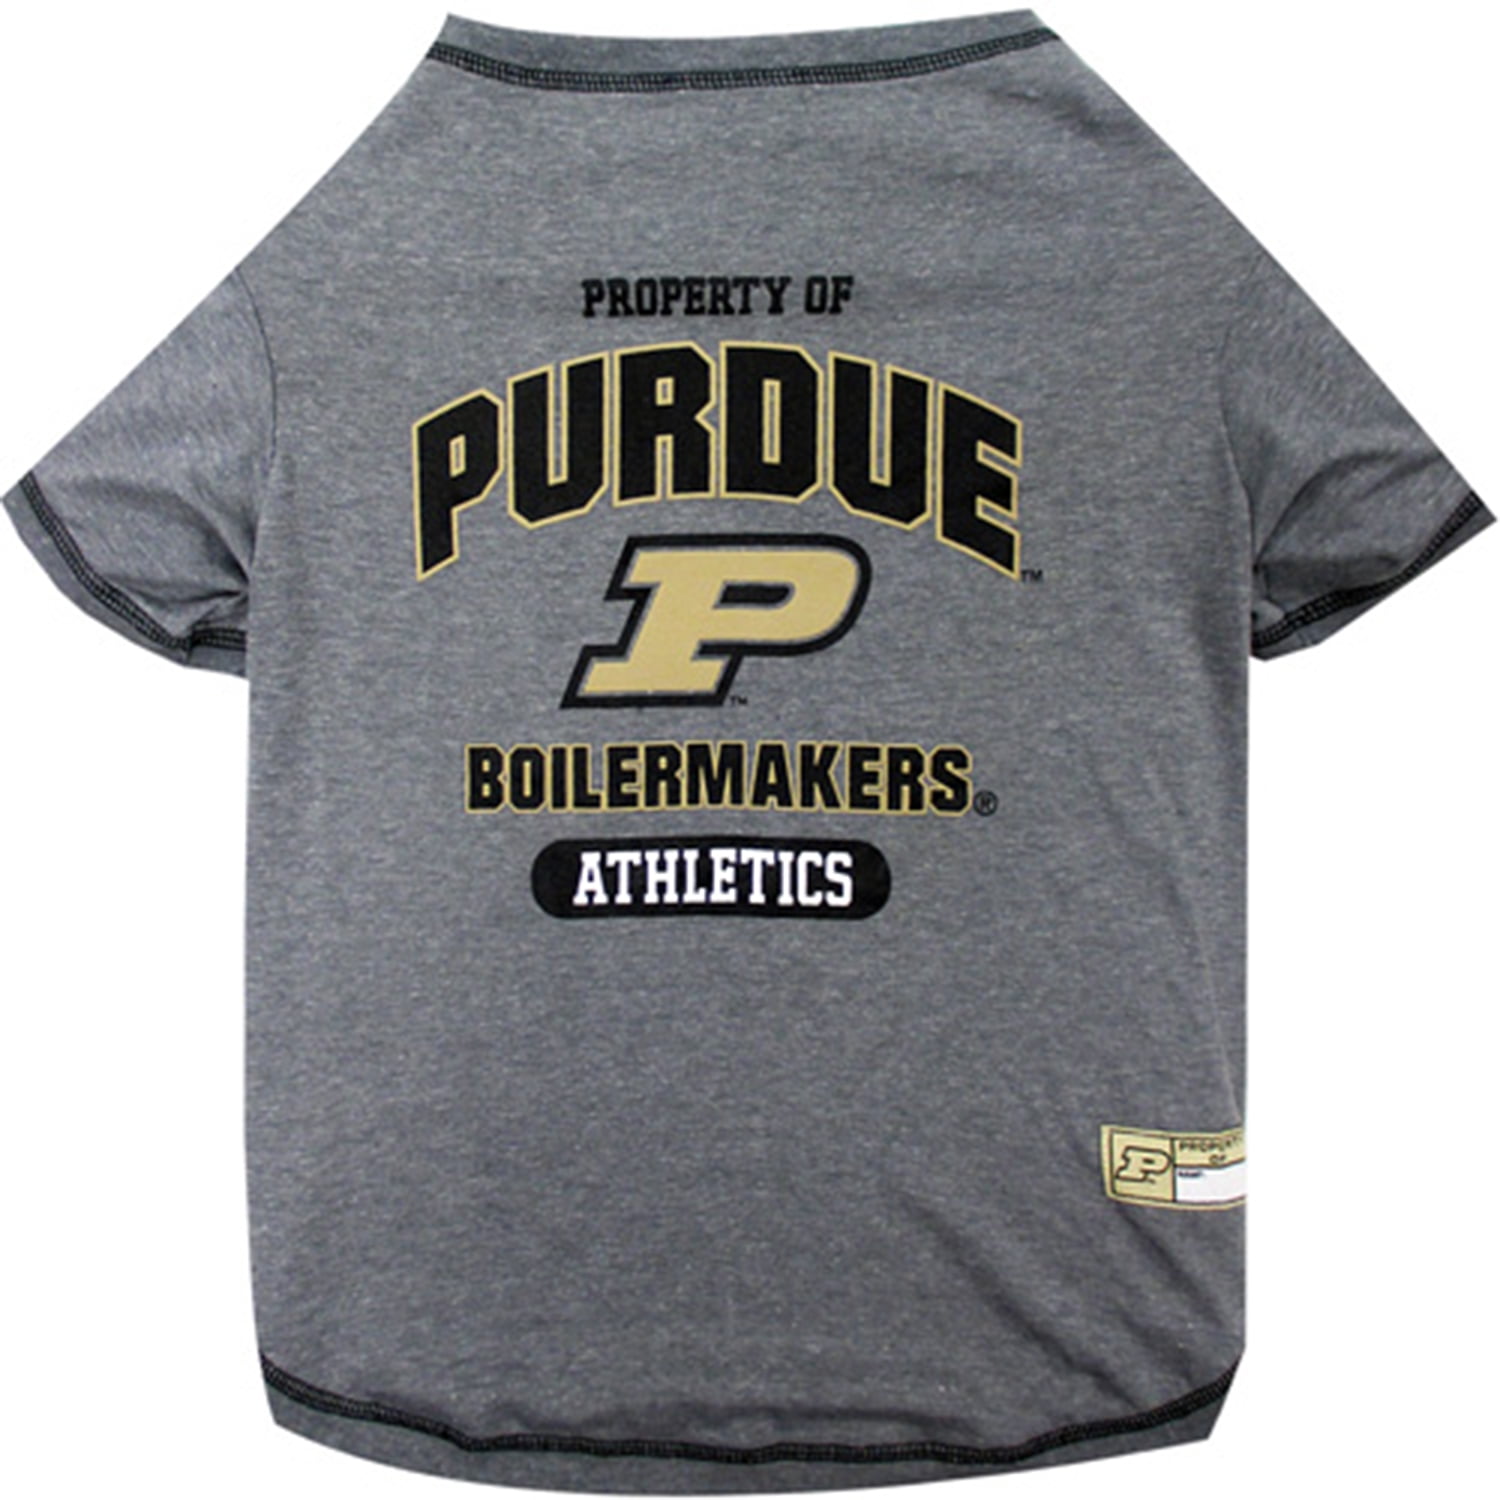 Available] Get New Custom Purdue Boilermakers Jersey White